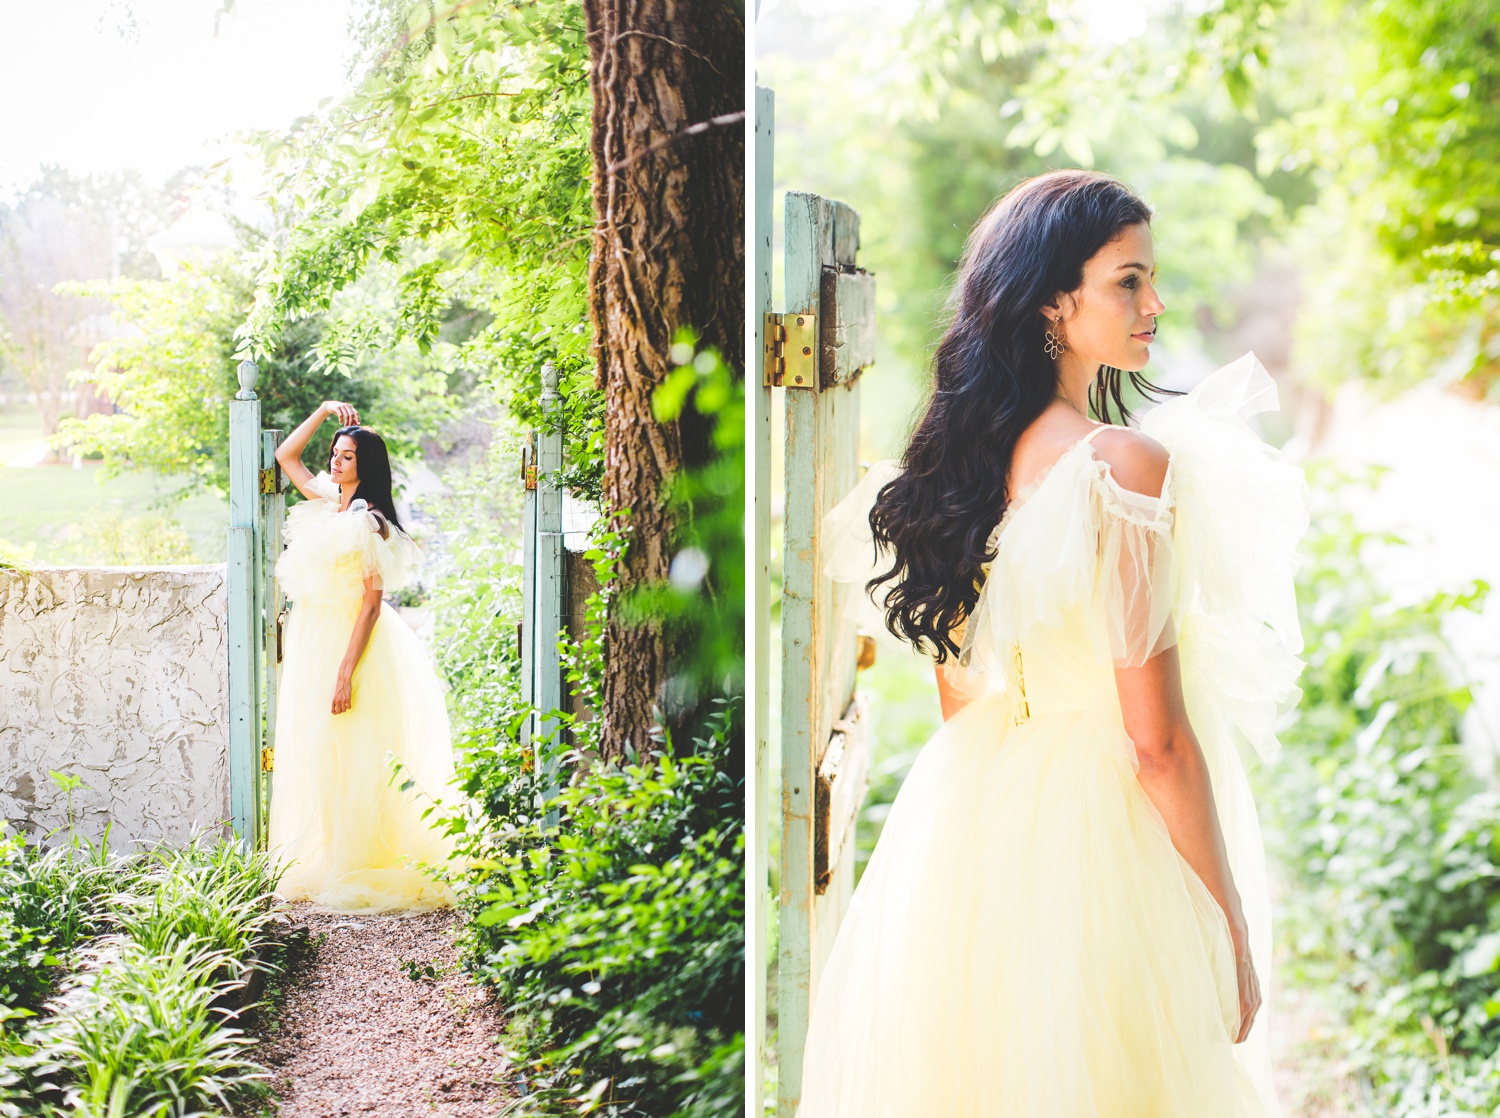 Colorful Wedding Photography in Tulsa: Bride in Garden Gate Wearing Yellow Dress